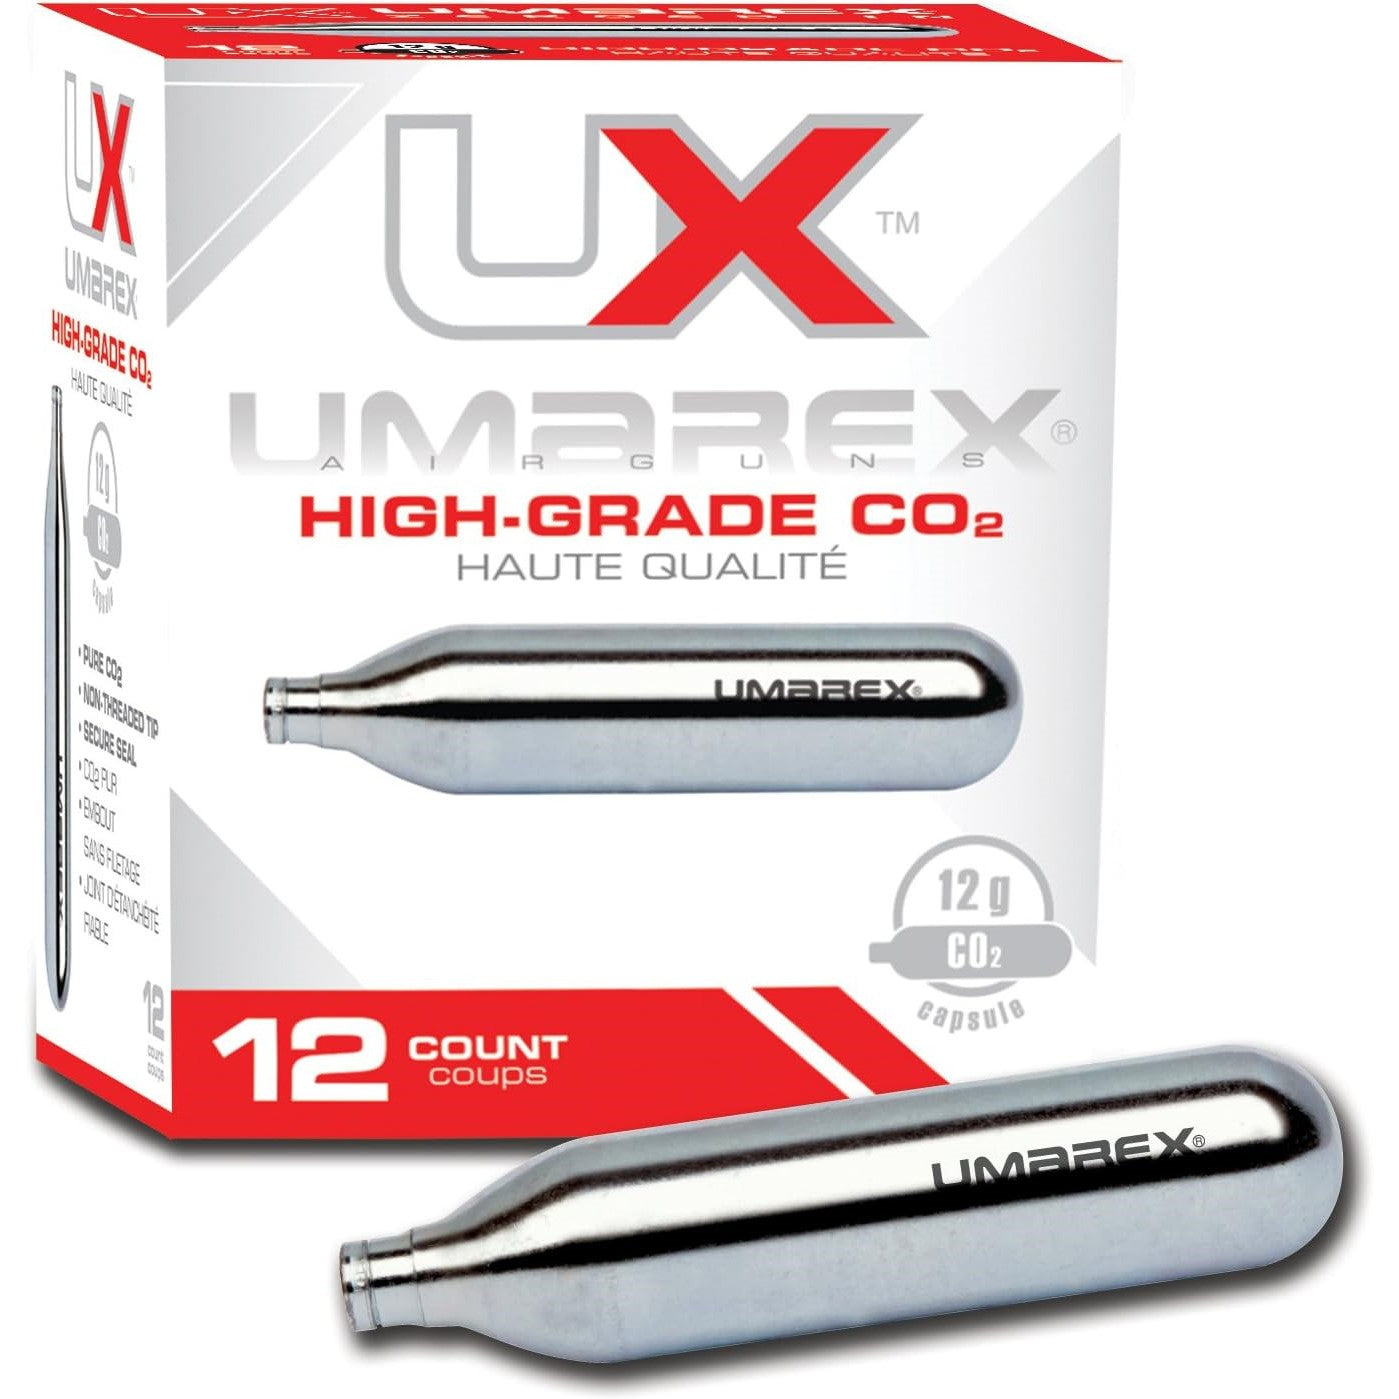 Prepared 2 Protect High-Grade 12G CO2 Cartridges 12-pack